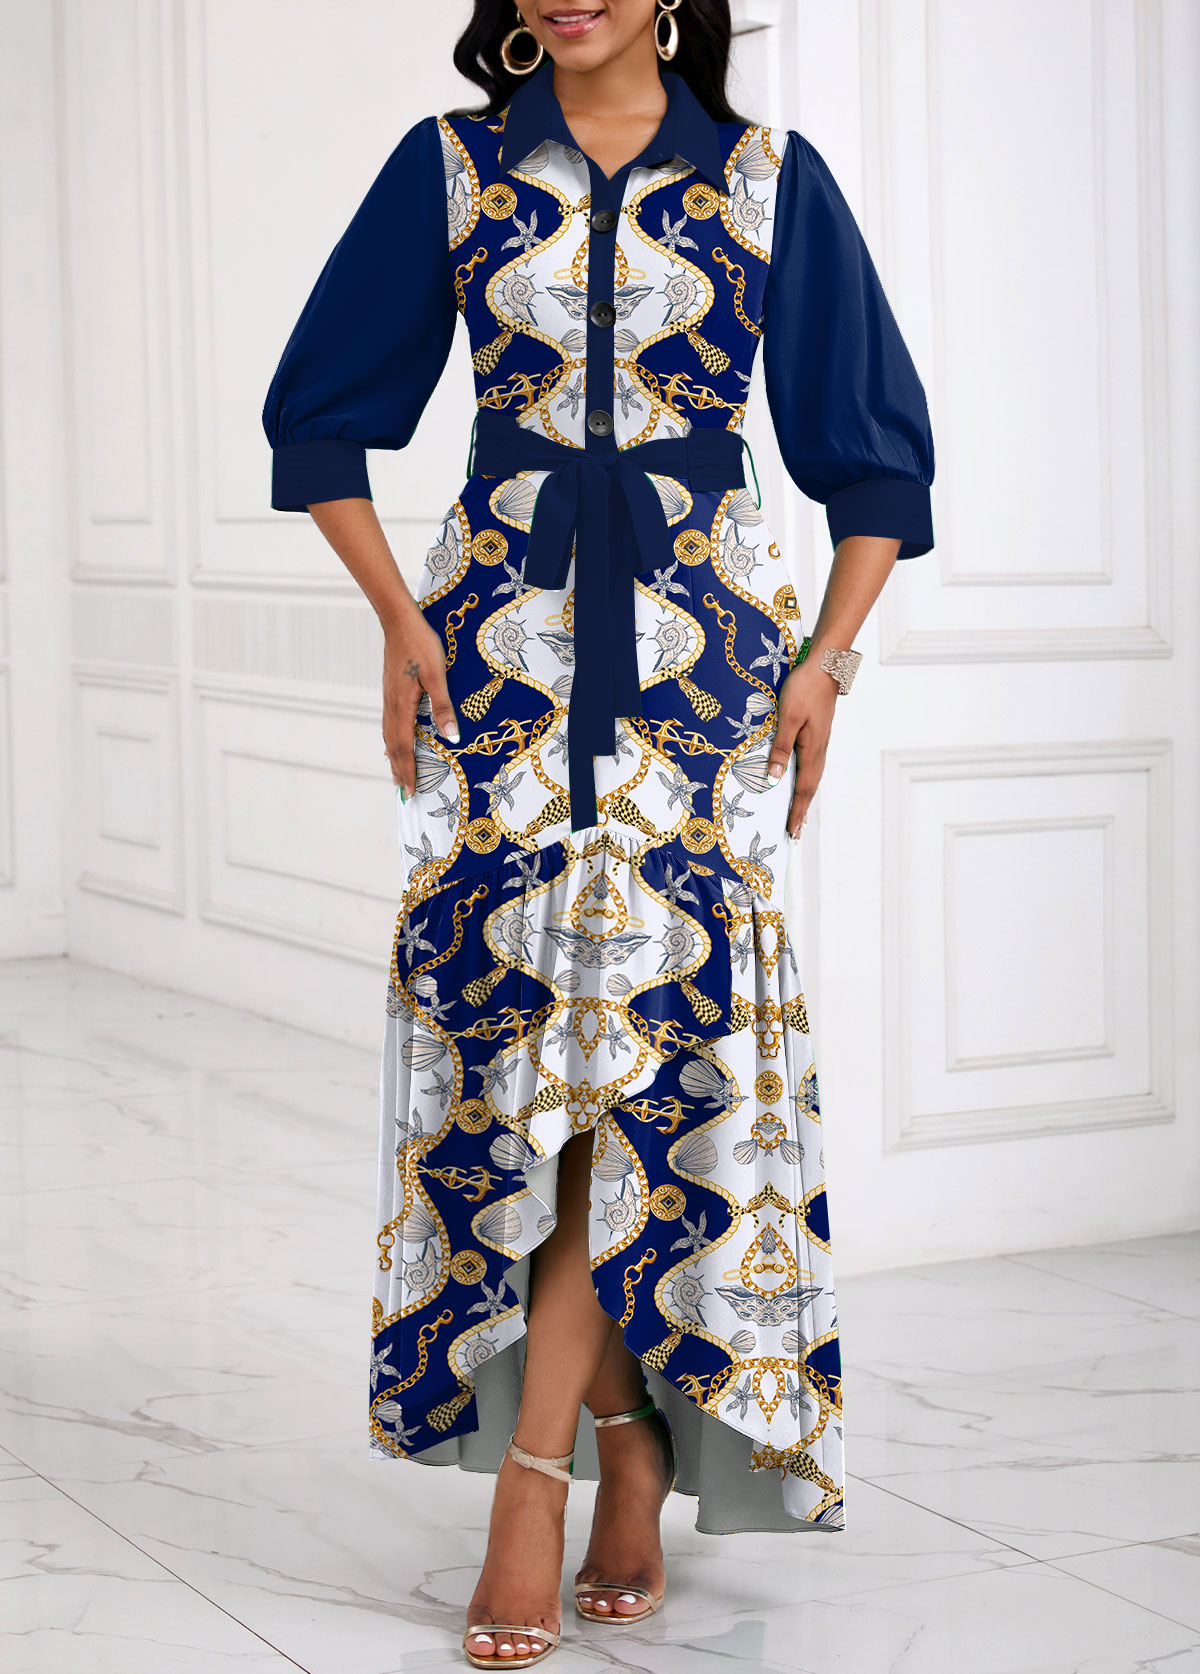 ROTITA Patchwork Tribal Print Navy Belted High Low Dress